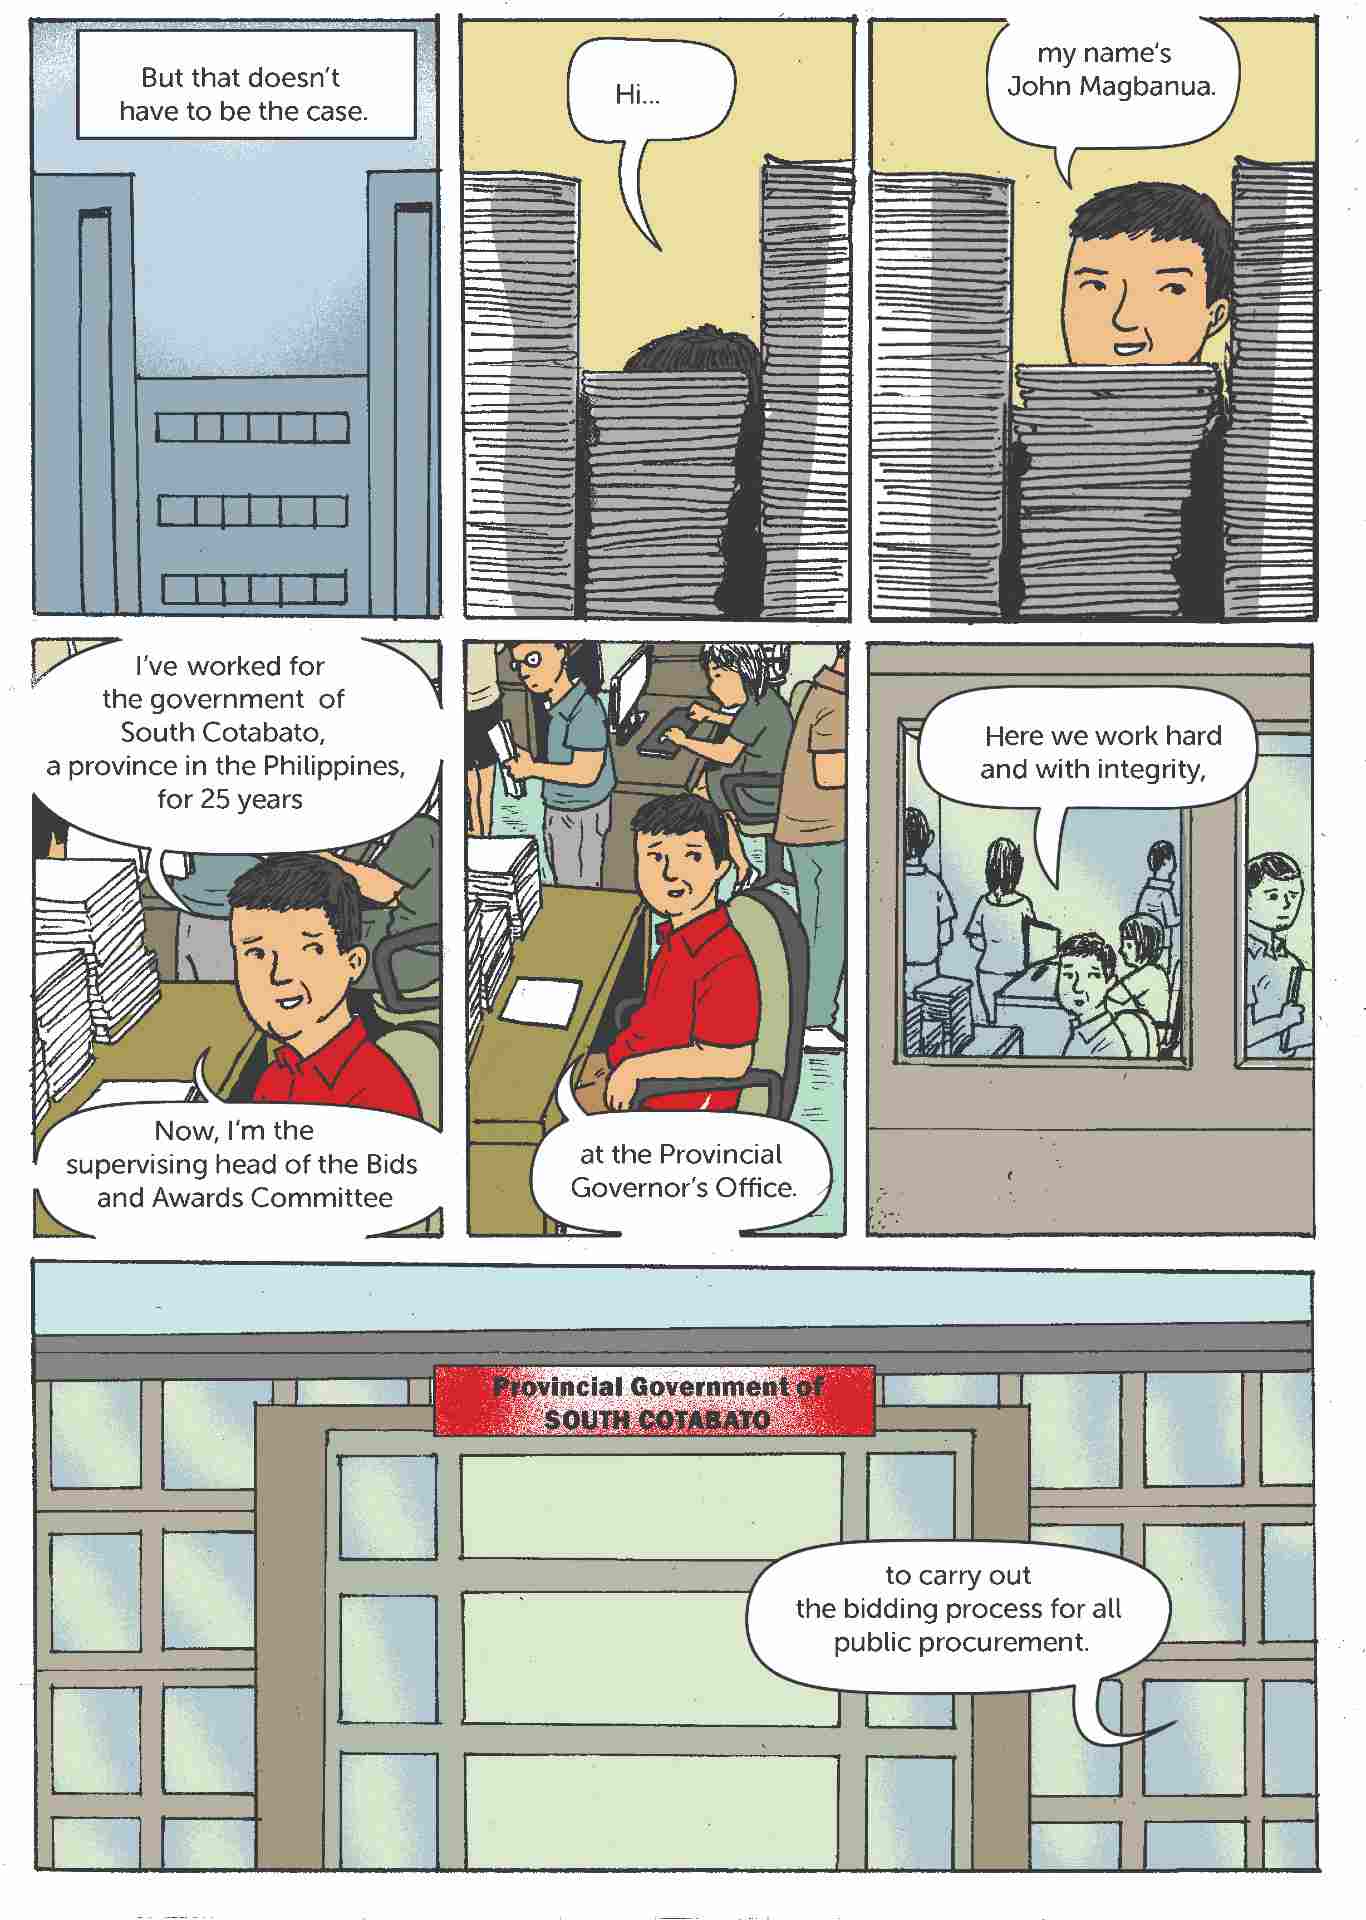 Comic strip about open contracting in the Philippines 2